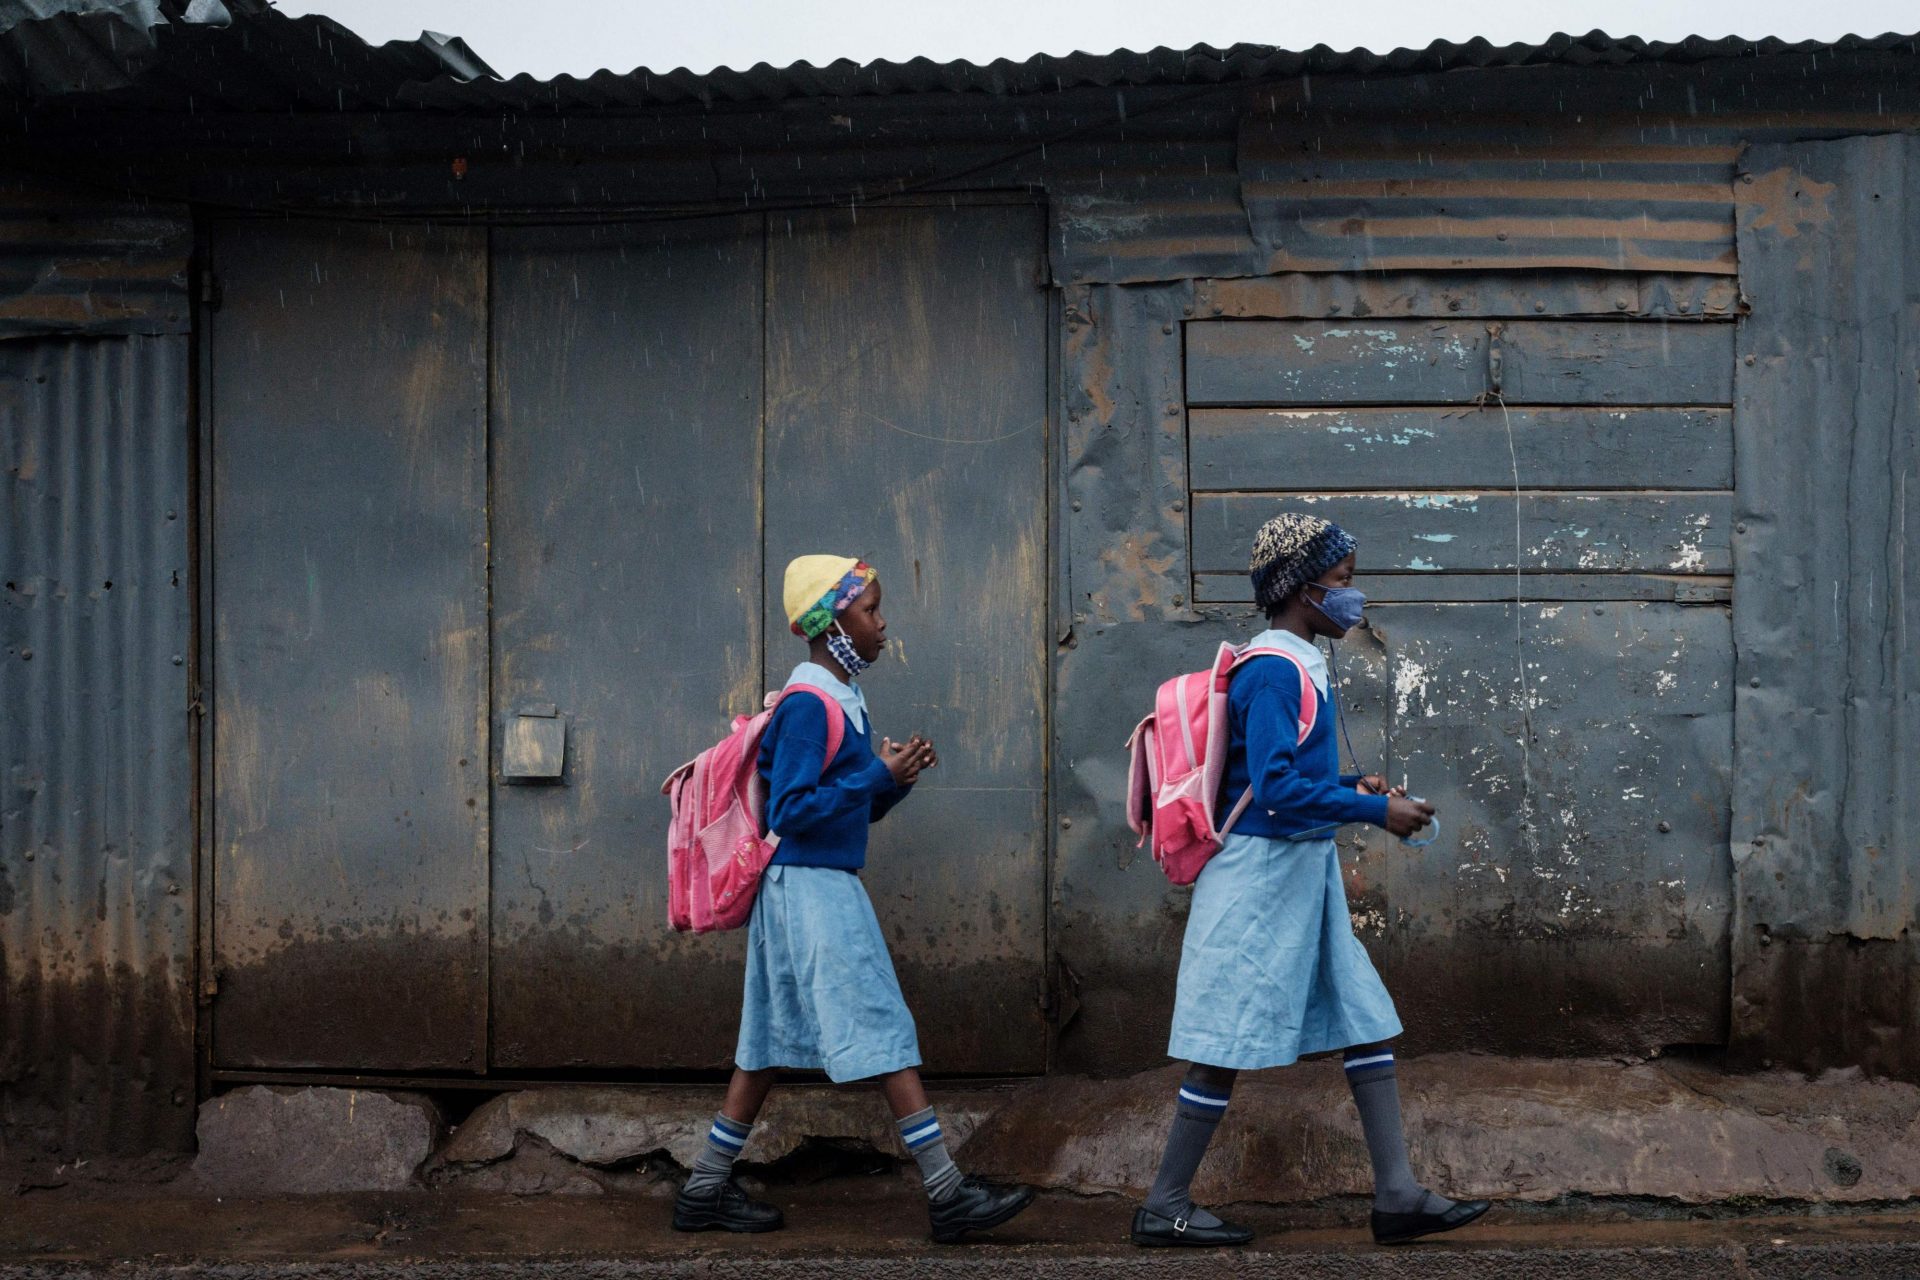 Pupils walk to school in Kibera slum, Nairobi, after a lengthy closure due to Covid-19. For most pupils, a whole year of school was cancelled. Photo: Yasuyoshi Chiba/AFP via Getty Images.